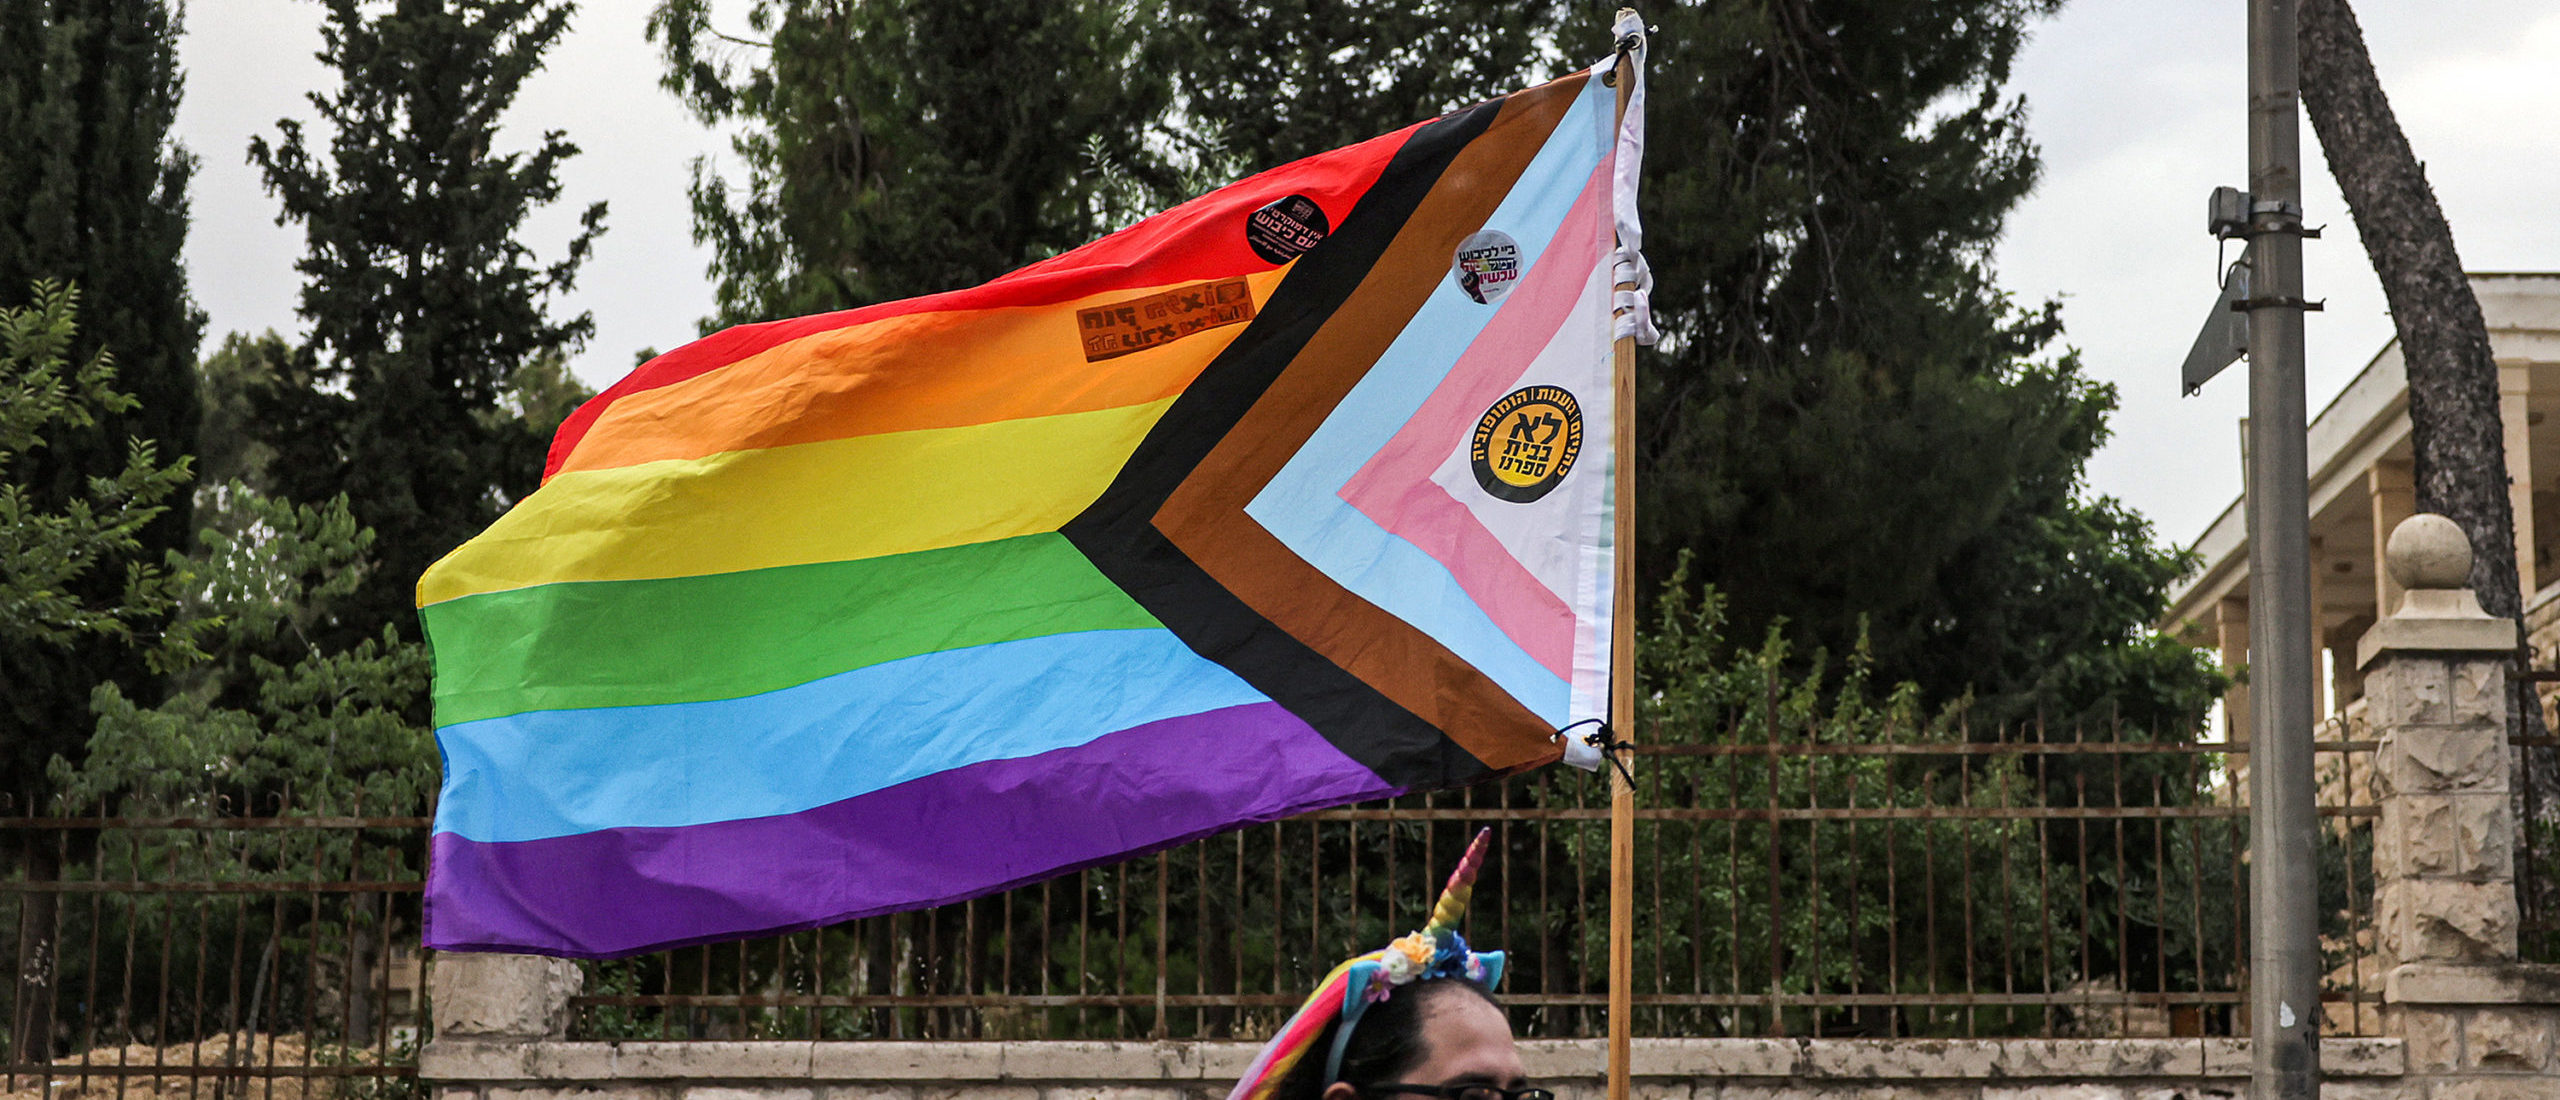 A person marches with a combined rainbow and transgender flag during the 21st annual Jerusalem Pride Parade in Jerusalem on June 1, 2023. (Photo by AHMAD GHARABLI / AFP) (Photo by AHMAD GHARABLI/AFP via Getty Images)